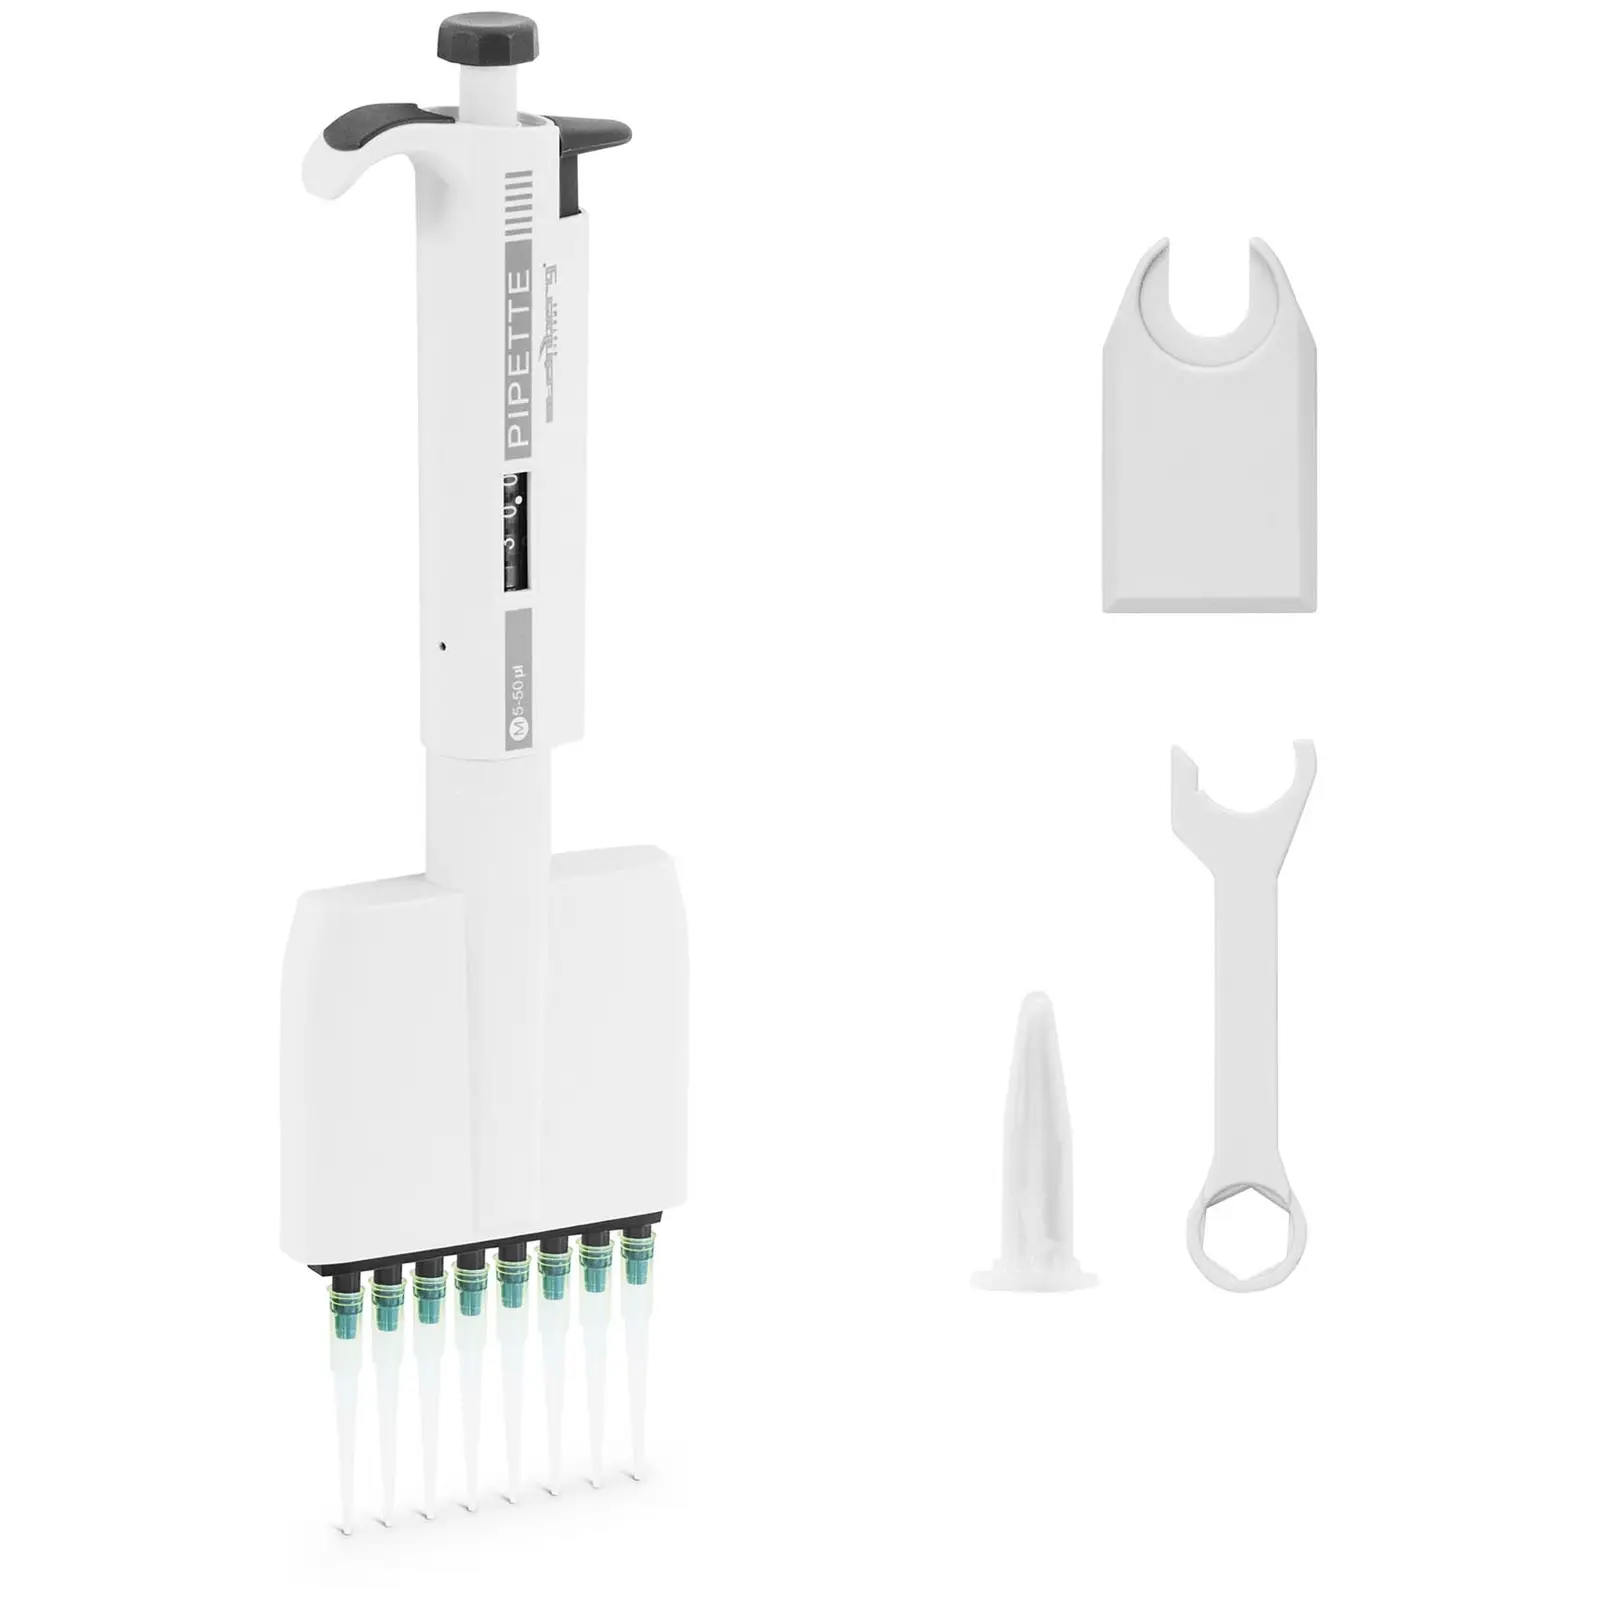 Multichannel pipette - for 8 tips - 0,005 - 0,05 ml